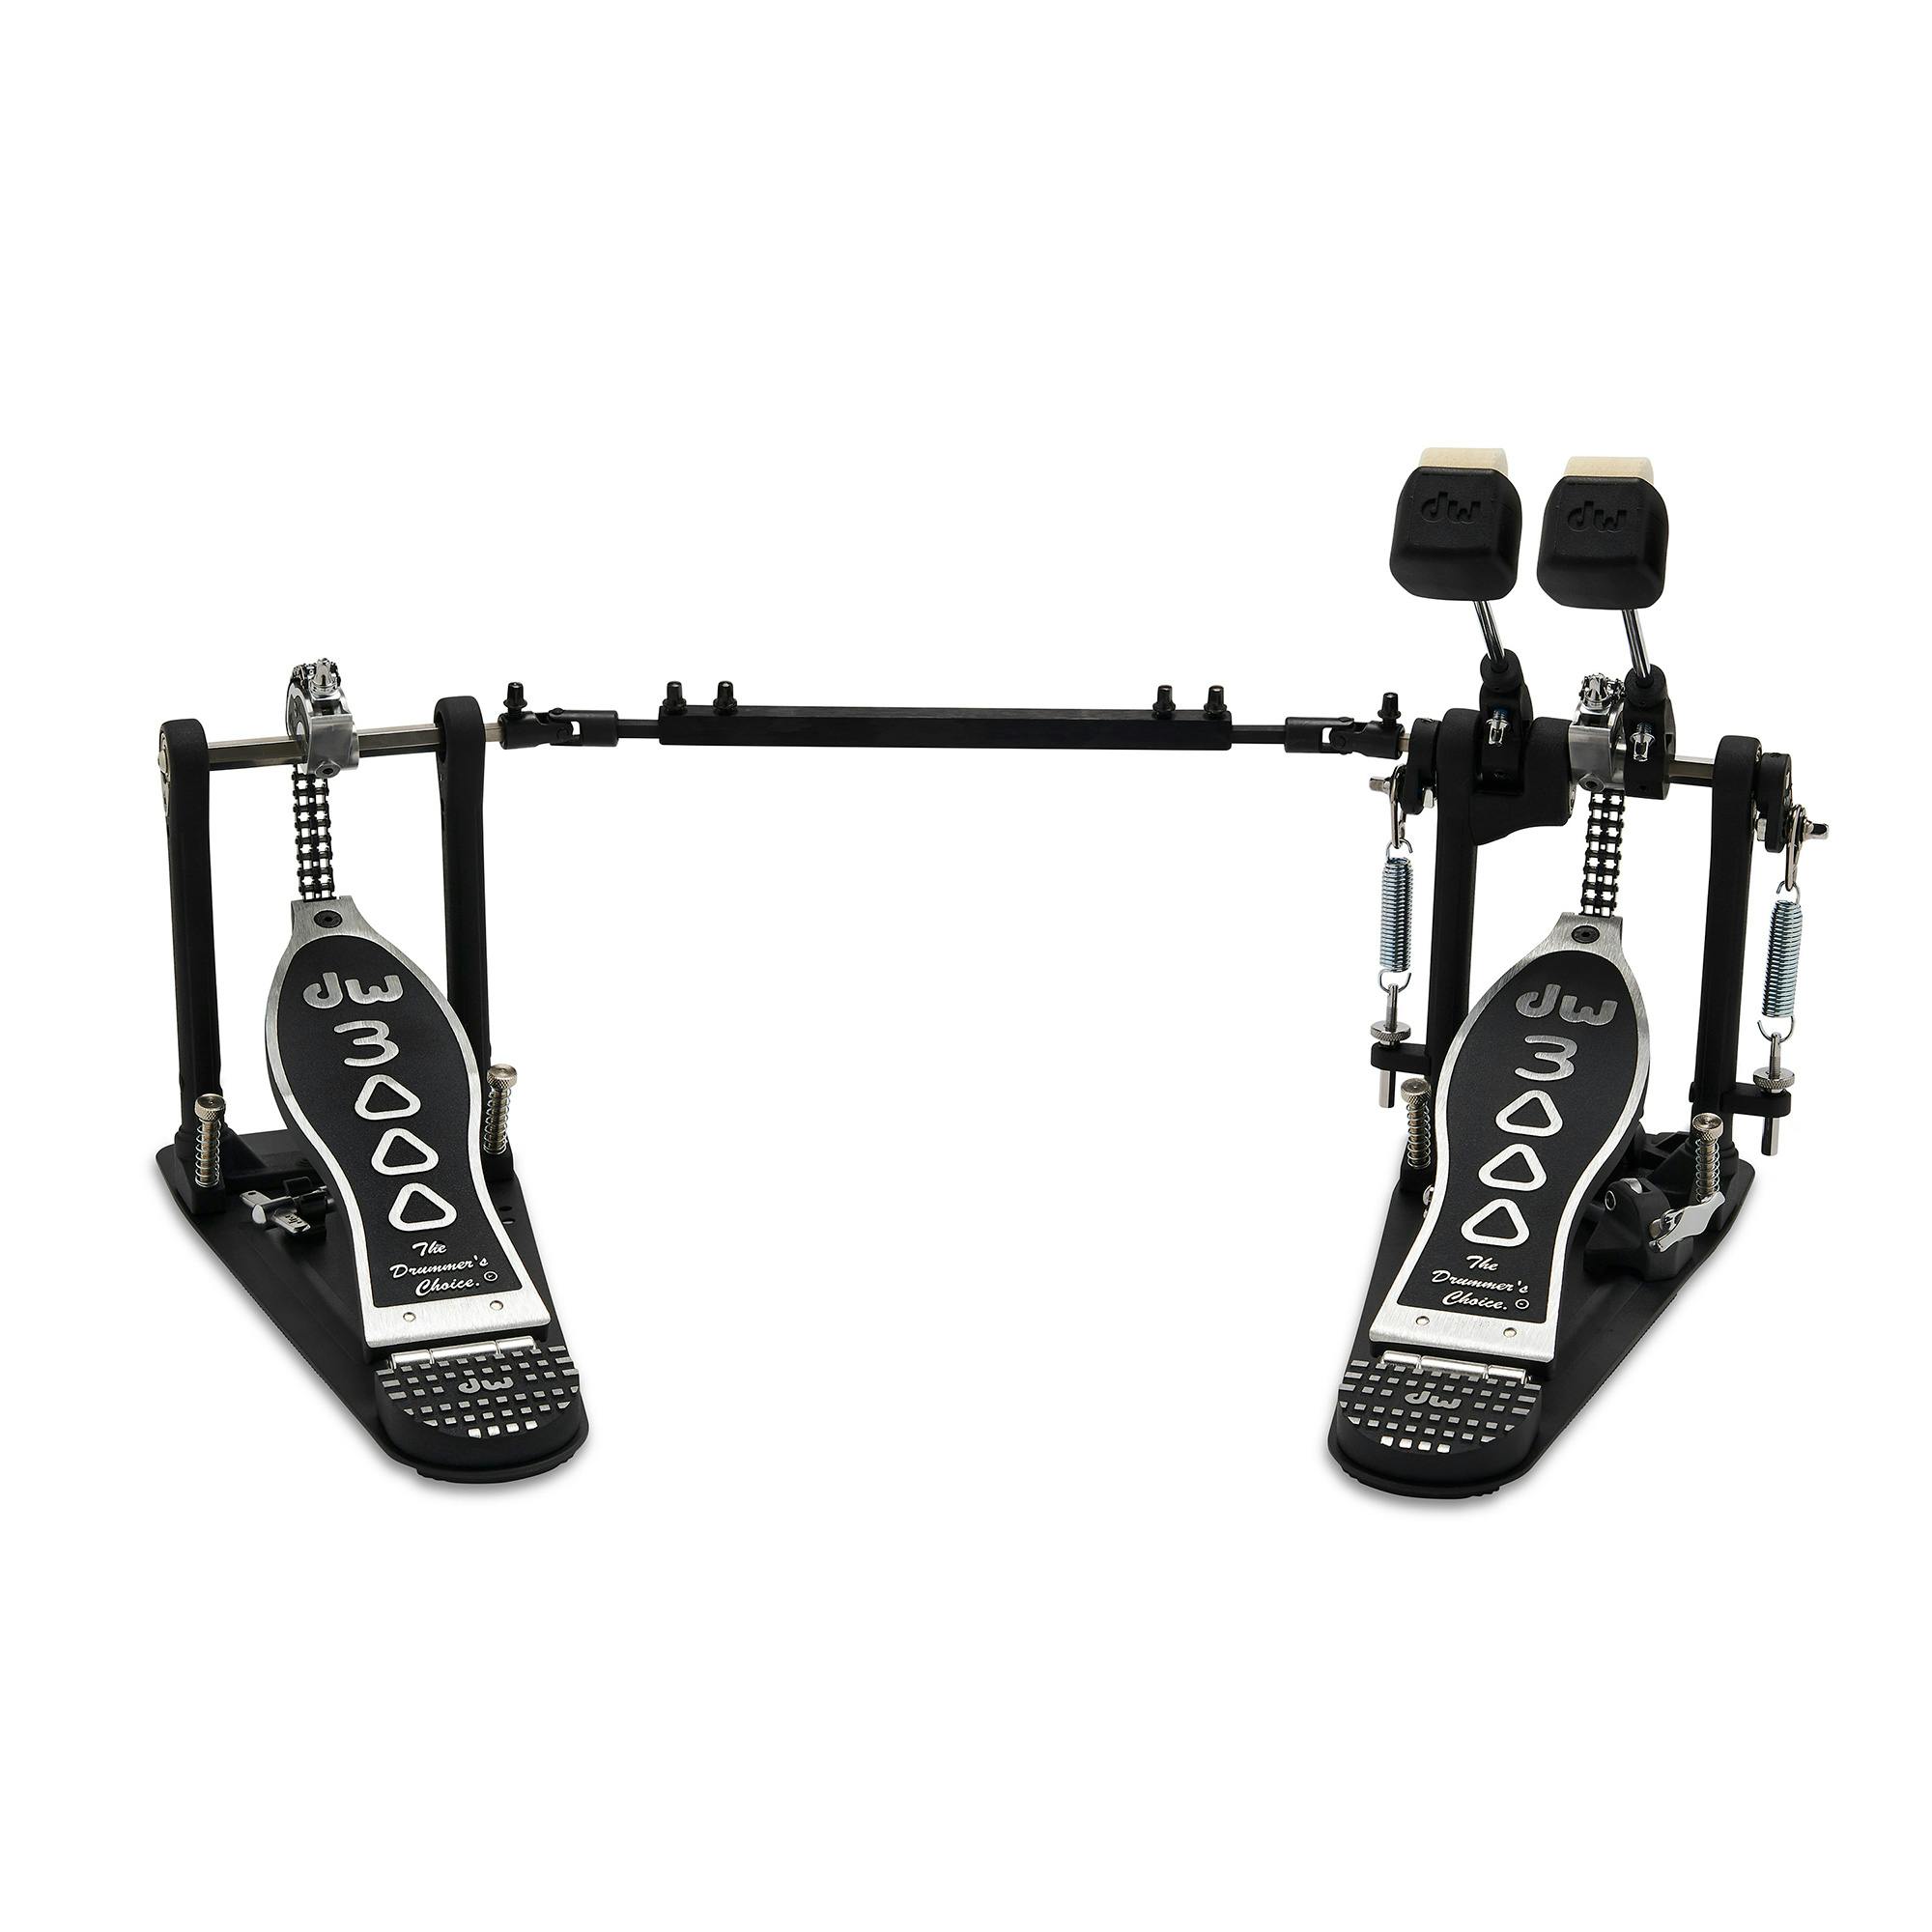 3000 Series Double Bass Pedal - Latest Model